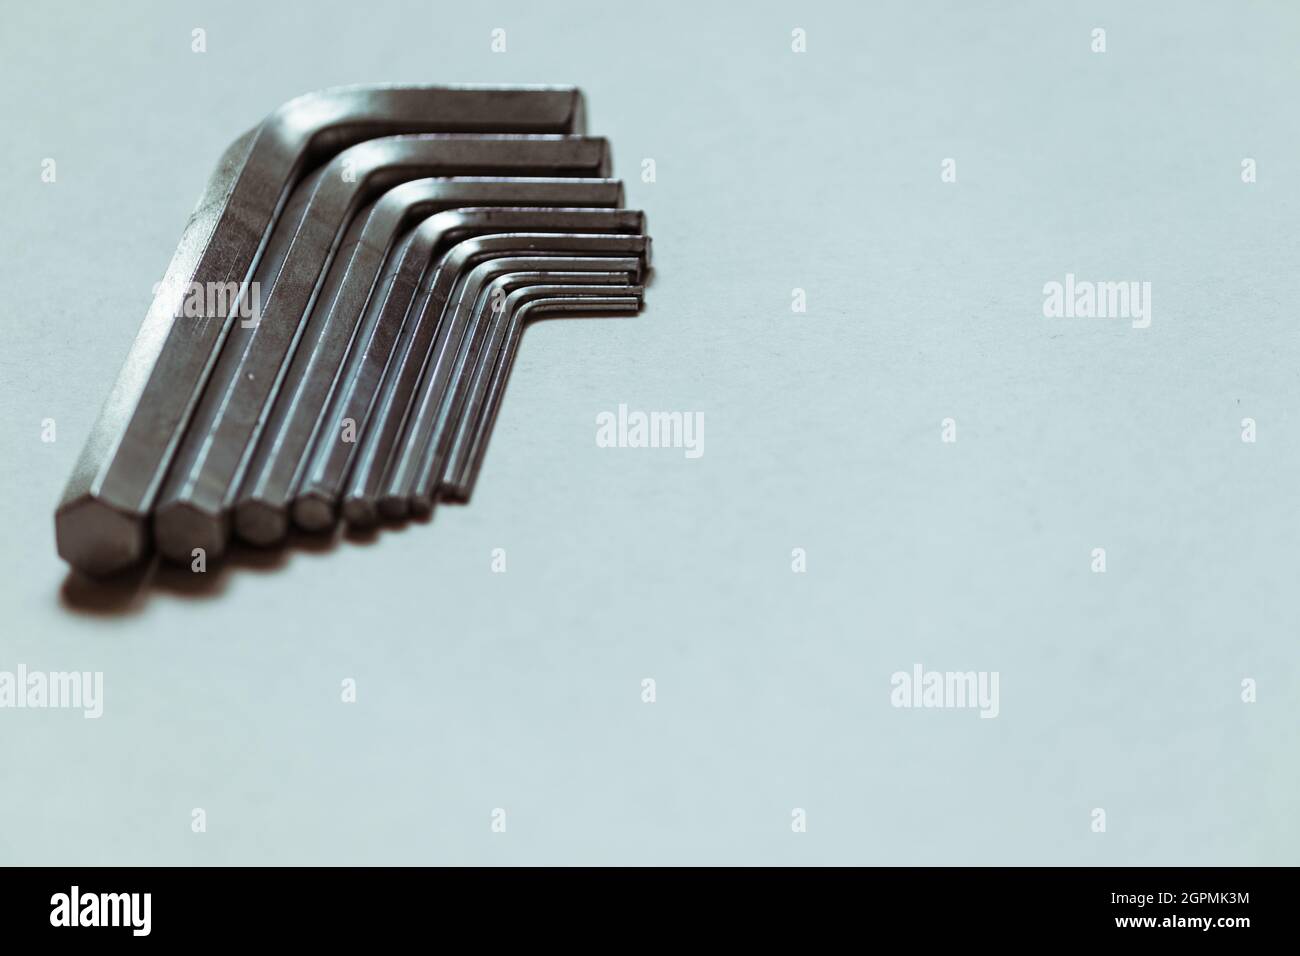 Set of hex keys close-up on a white background.  Stock Photo